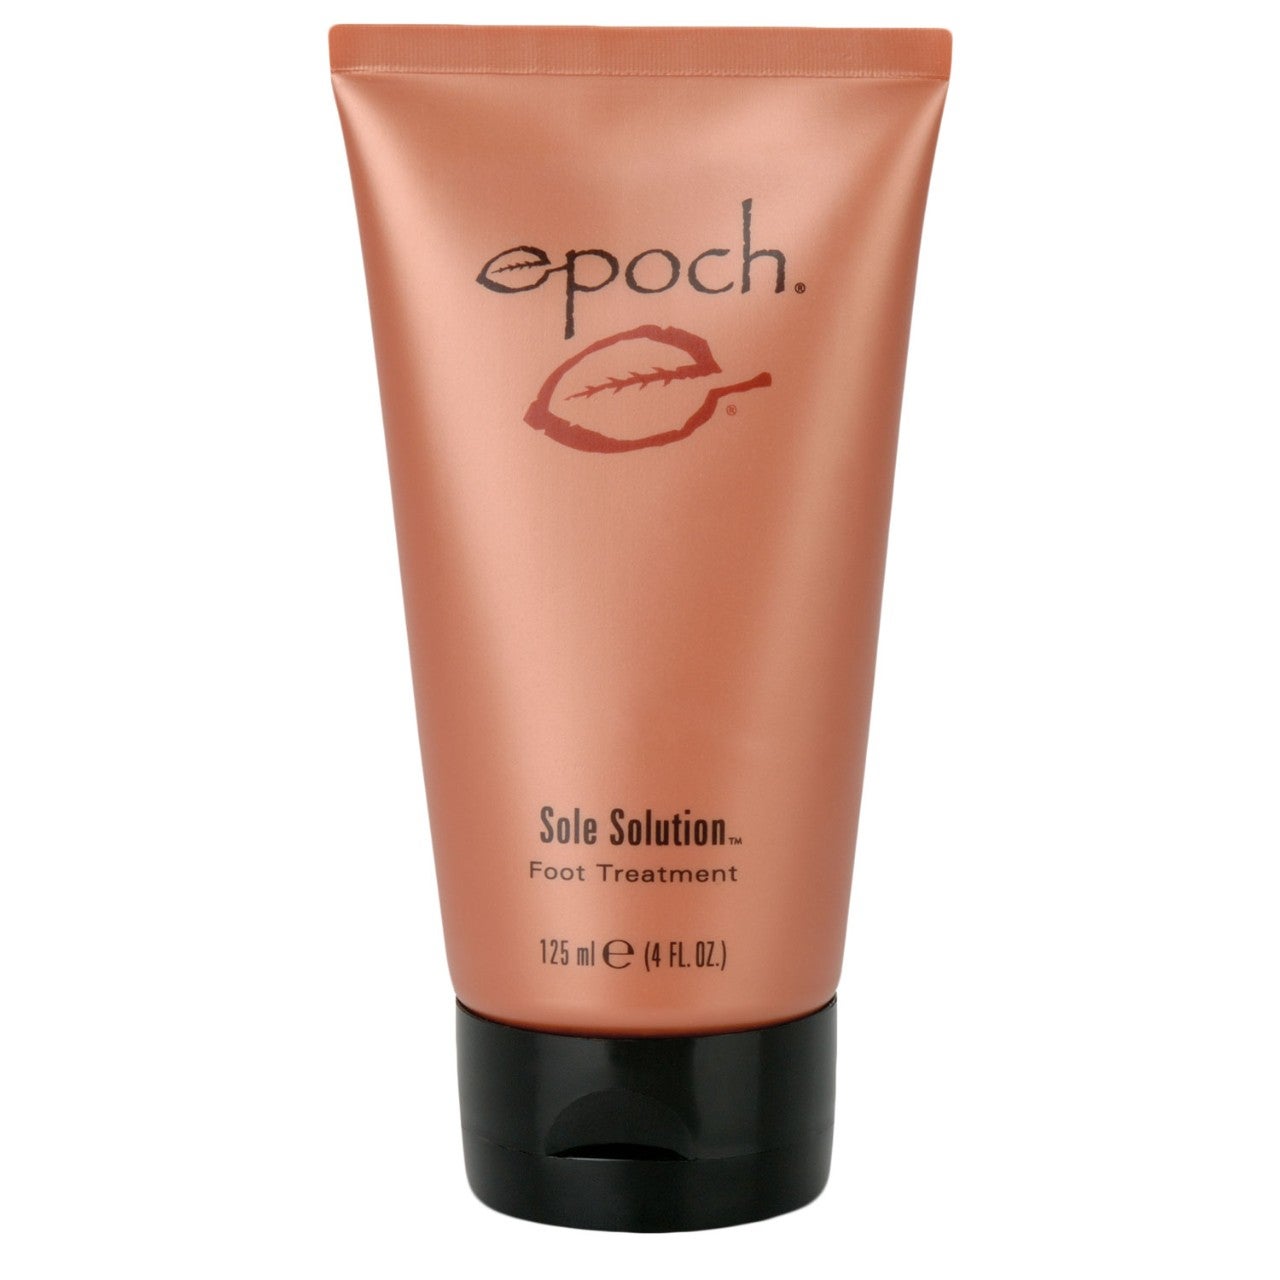 Tube of Epoch Sole Solution by Nu Skin skincare for the body